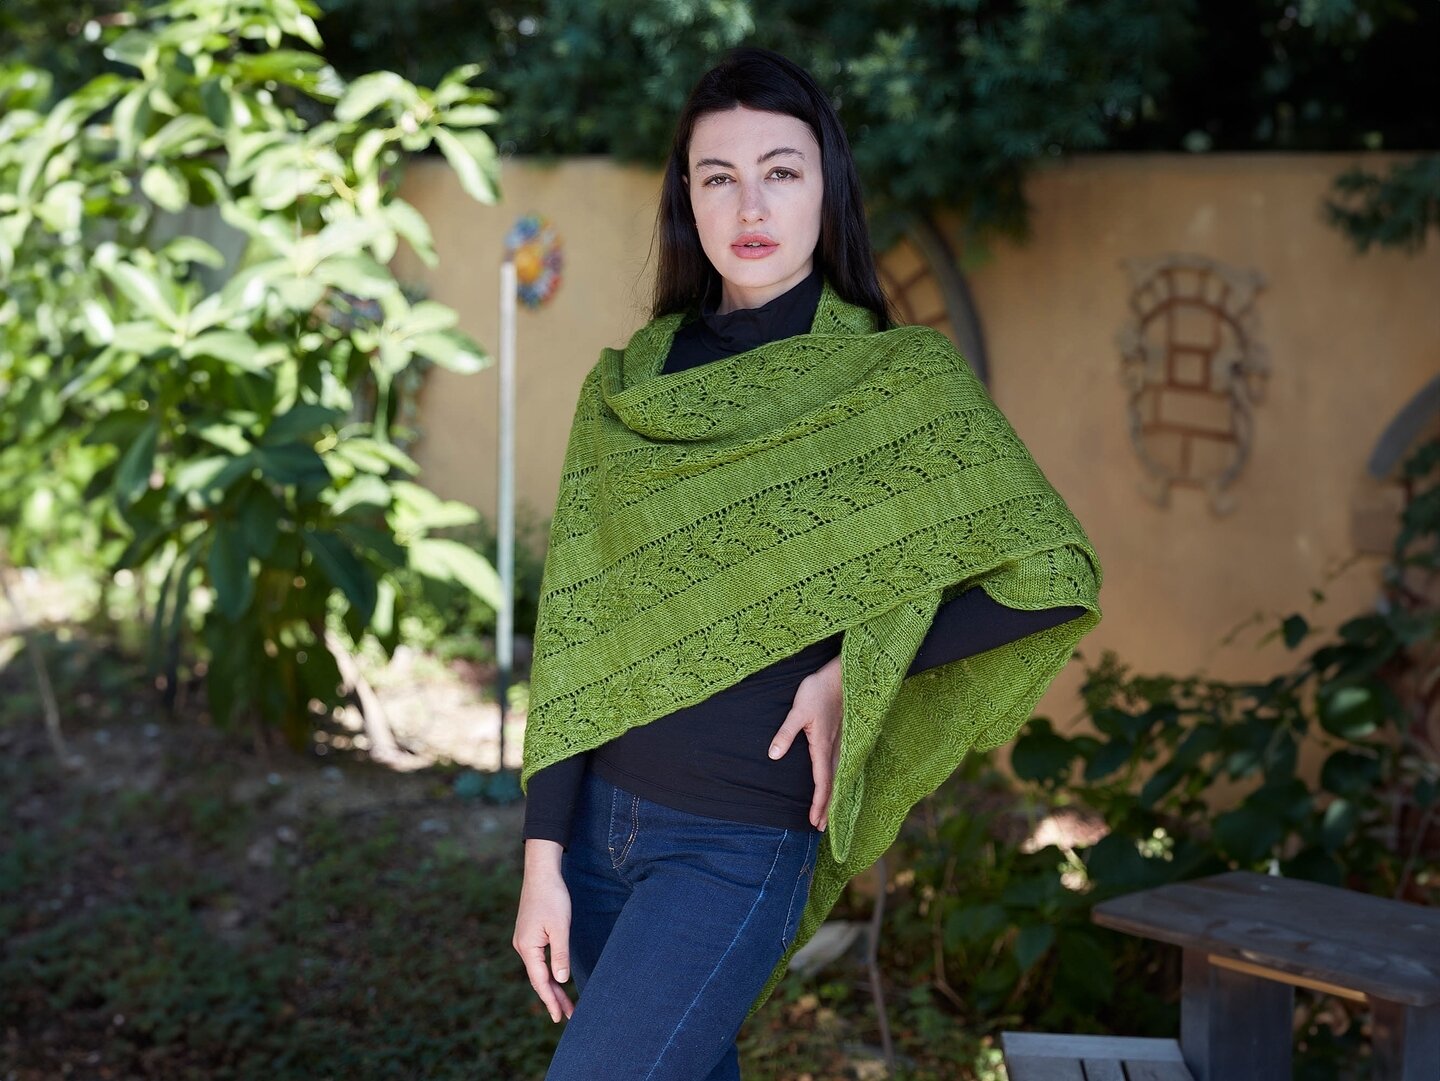 Asymmetrical triangular shawls are one of my favorite shawl shapes to make and wear.

The neck edge of the shawl lies along the knit fabric's bias. Since a fabric's bias is flexible, this makes wrapping the shawl around your neck easy and comfortable